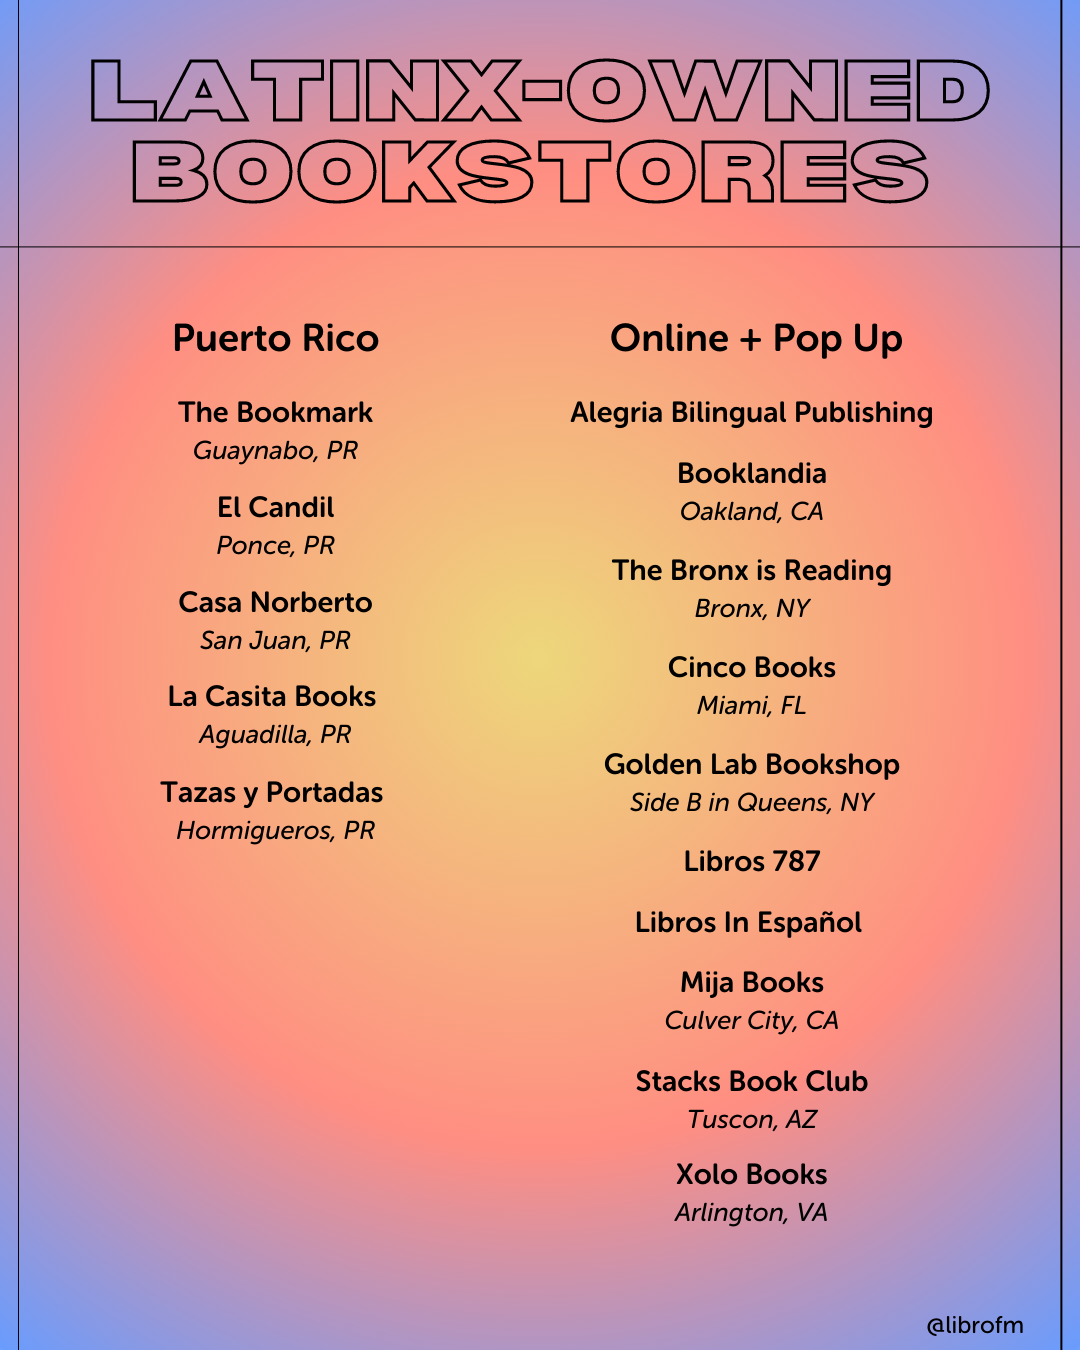 Graphic that reads "Latinx-owned bookstores" and lists out all the Puerto Rico and Online + Pop-up bookstores mentioned in this blog post.